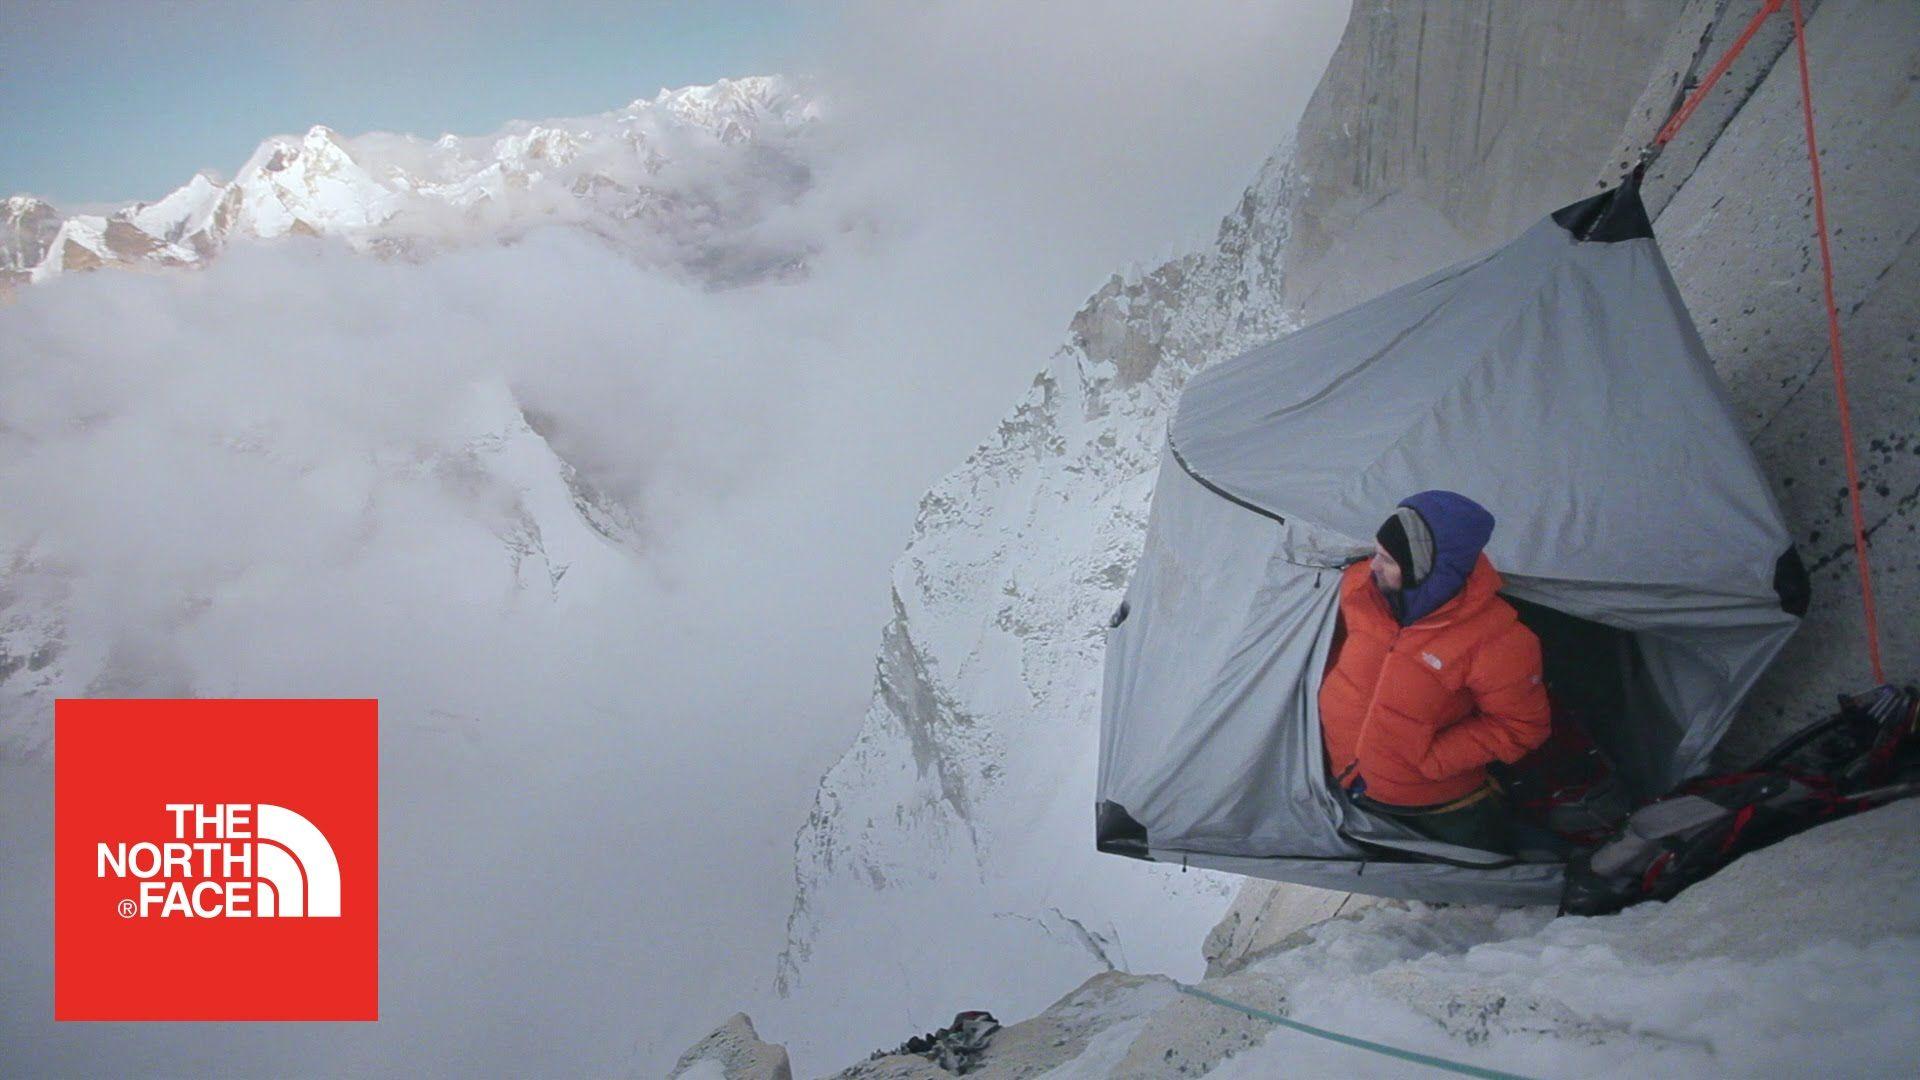 The North Face Film Advert By : Your Land